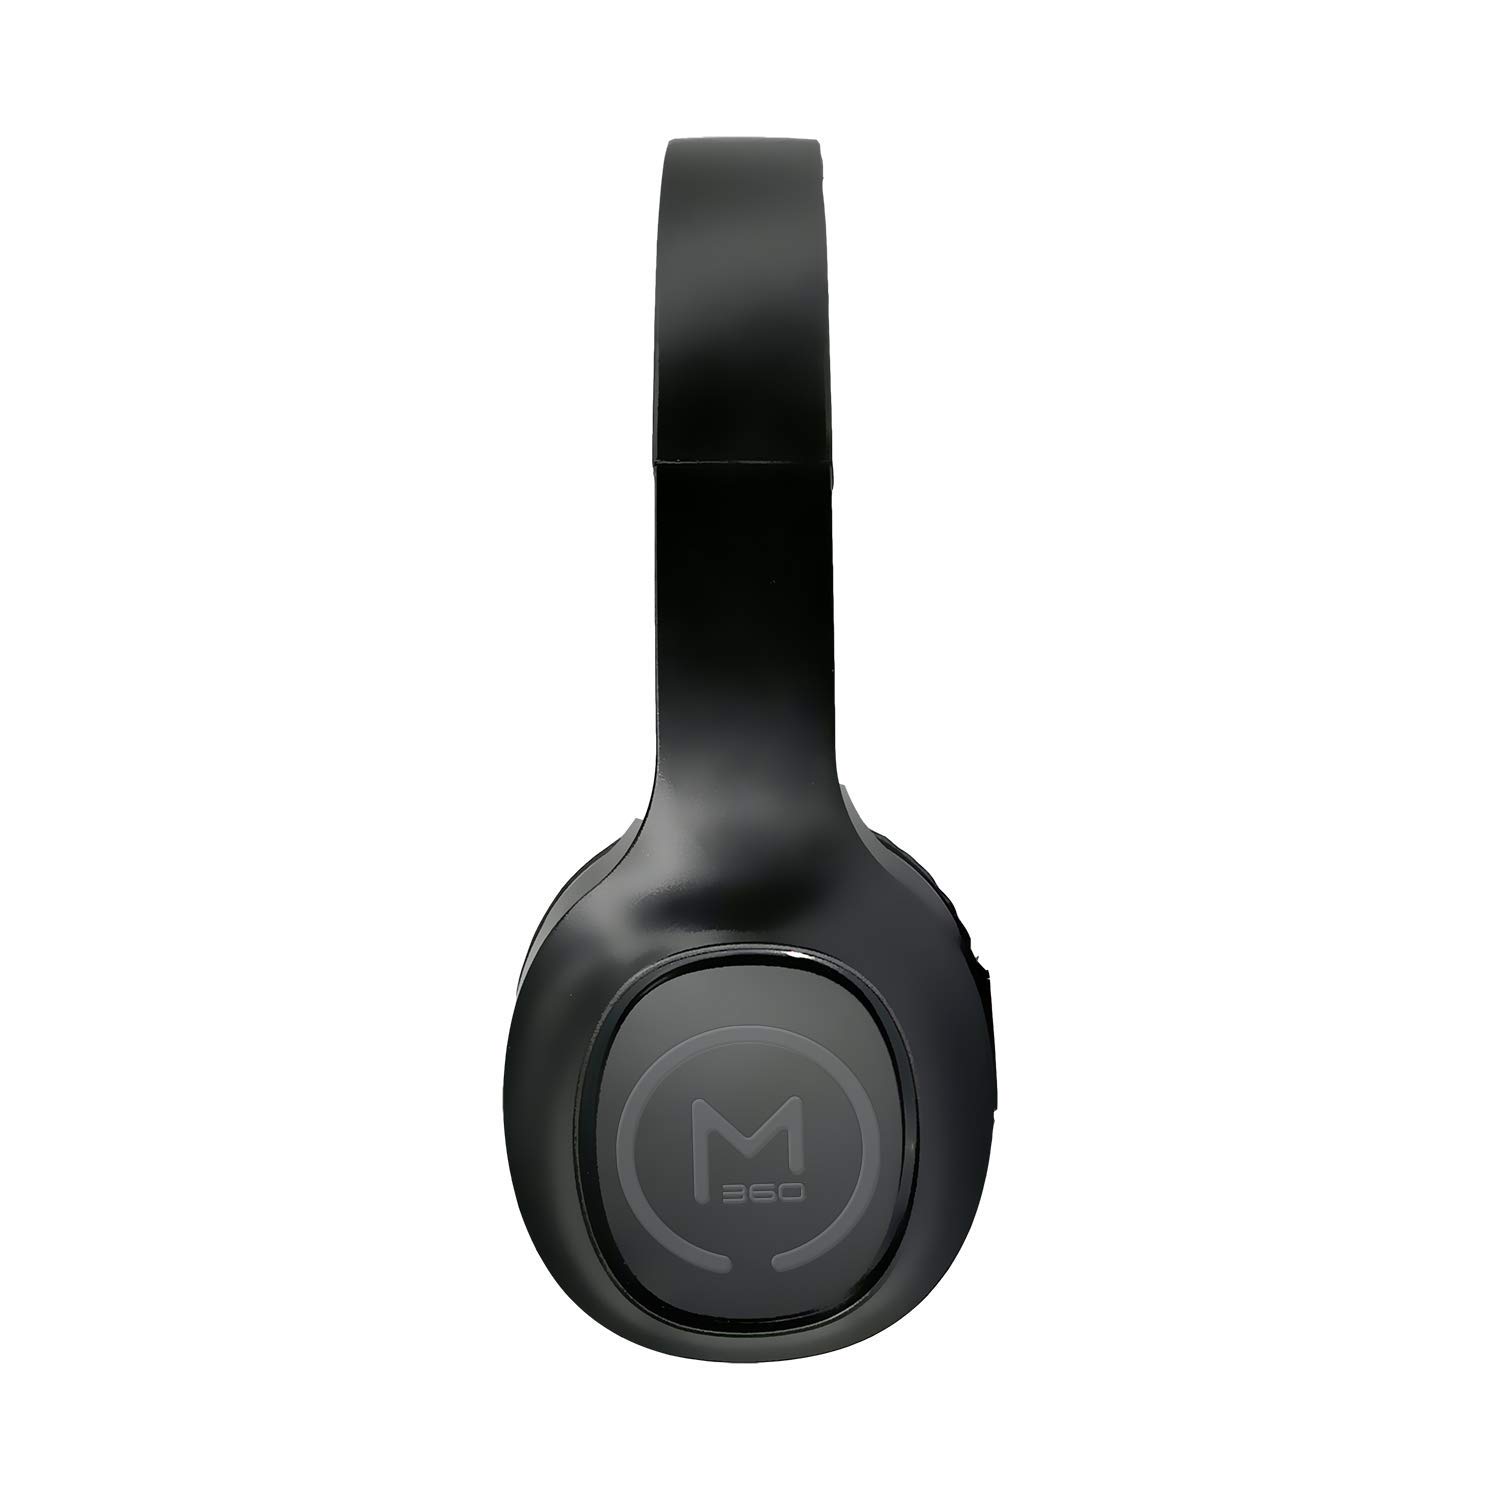 Morpheus 360 Tremors Bluetooth Headphones with Built-in Microphone, One Touch Control, Wireless Headphones, Bluetooth Headset, Gaming Headphones, Over-Ear Headphones, Wireless Gaming Headset - HP4500B